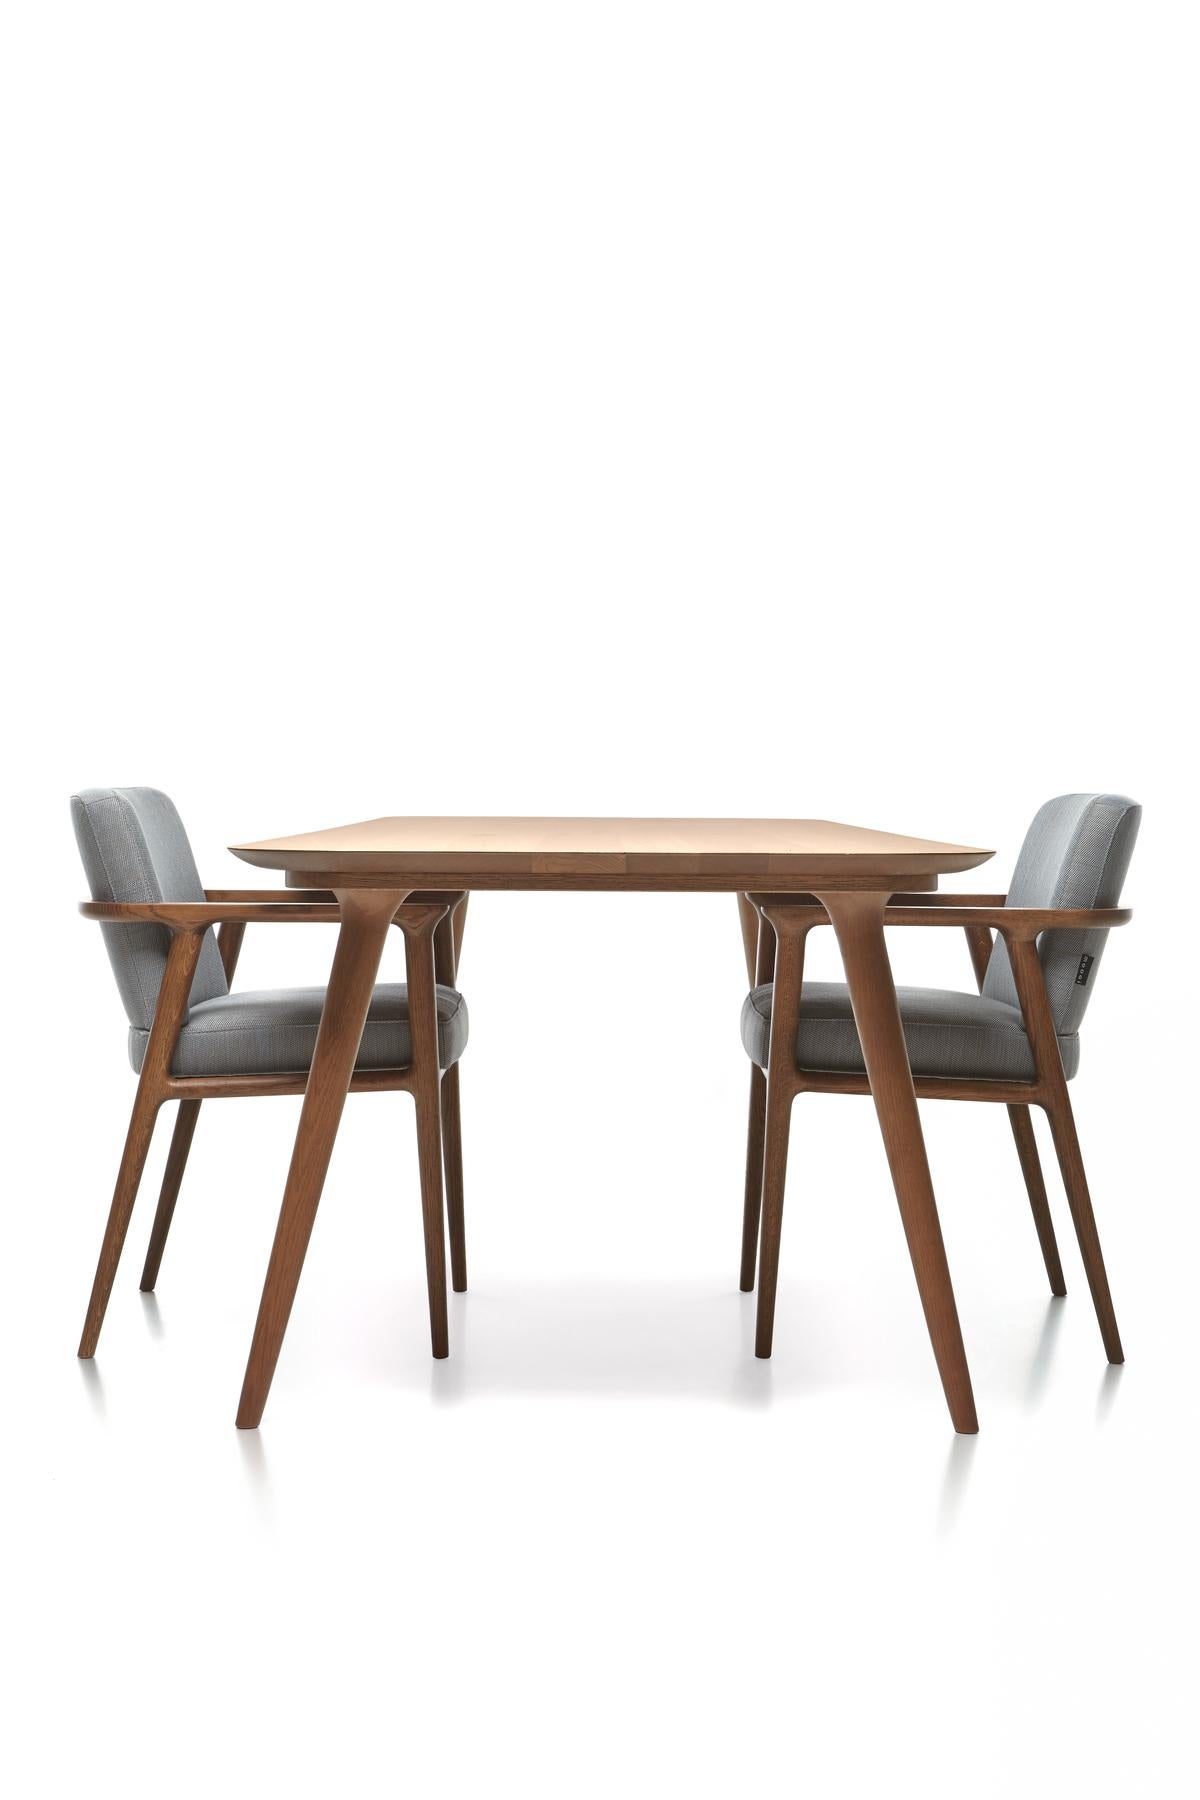 Modern Moooi Zio Dining Chair in Jacquard Blue Upholstery with Oak Stained Black Frame For Sale